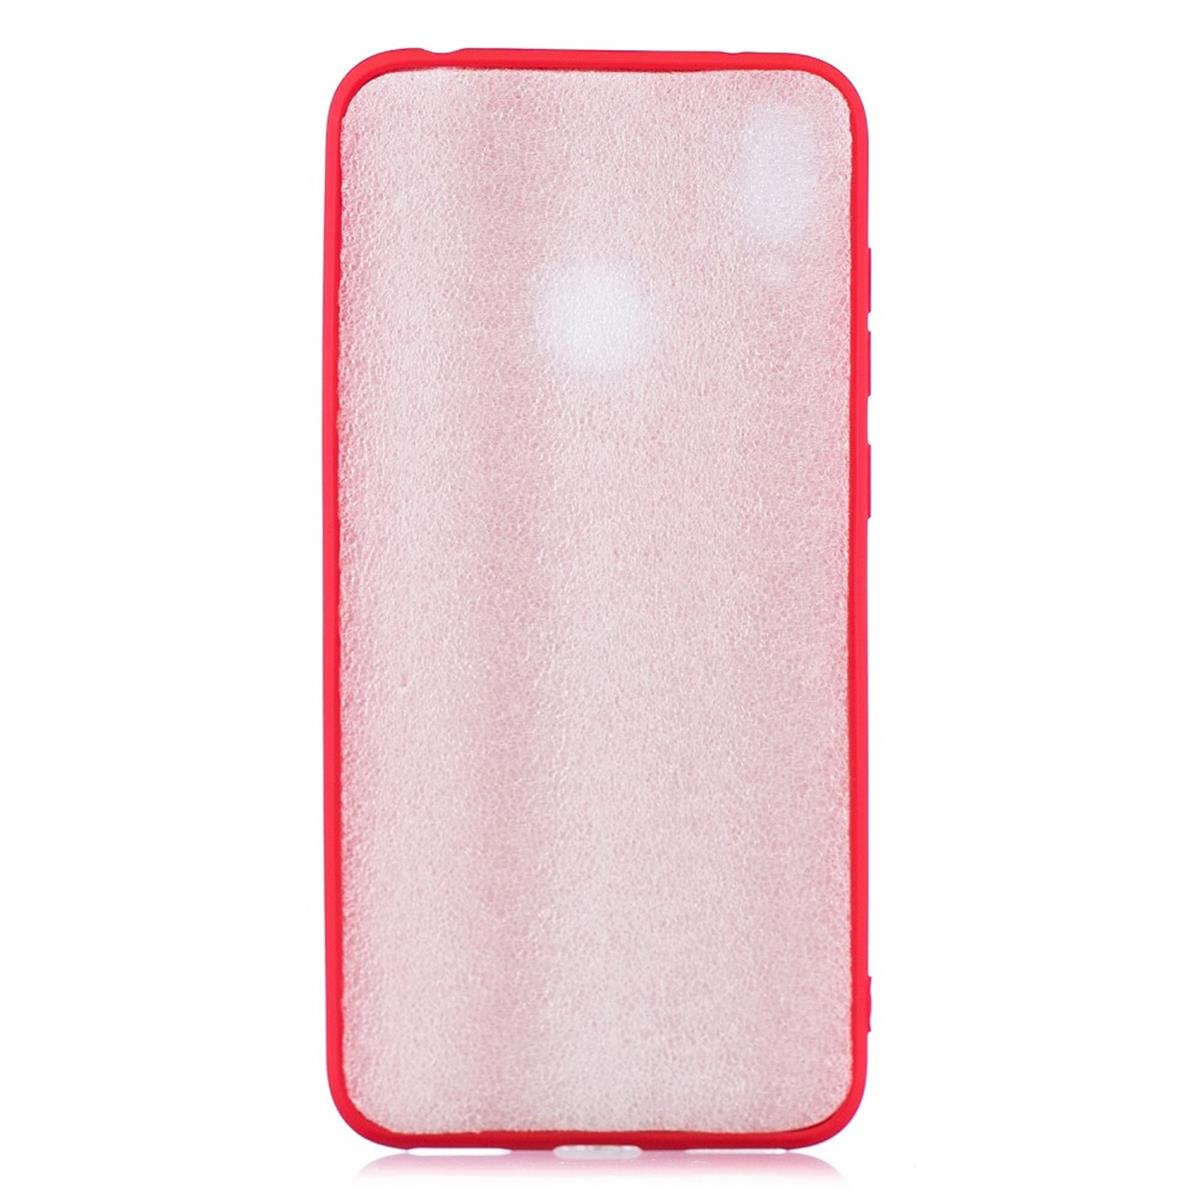 (2019), Rot Huawei, aus Y7 Backcover, COVERKINGZ Silikon, Handycase